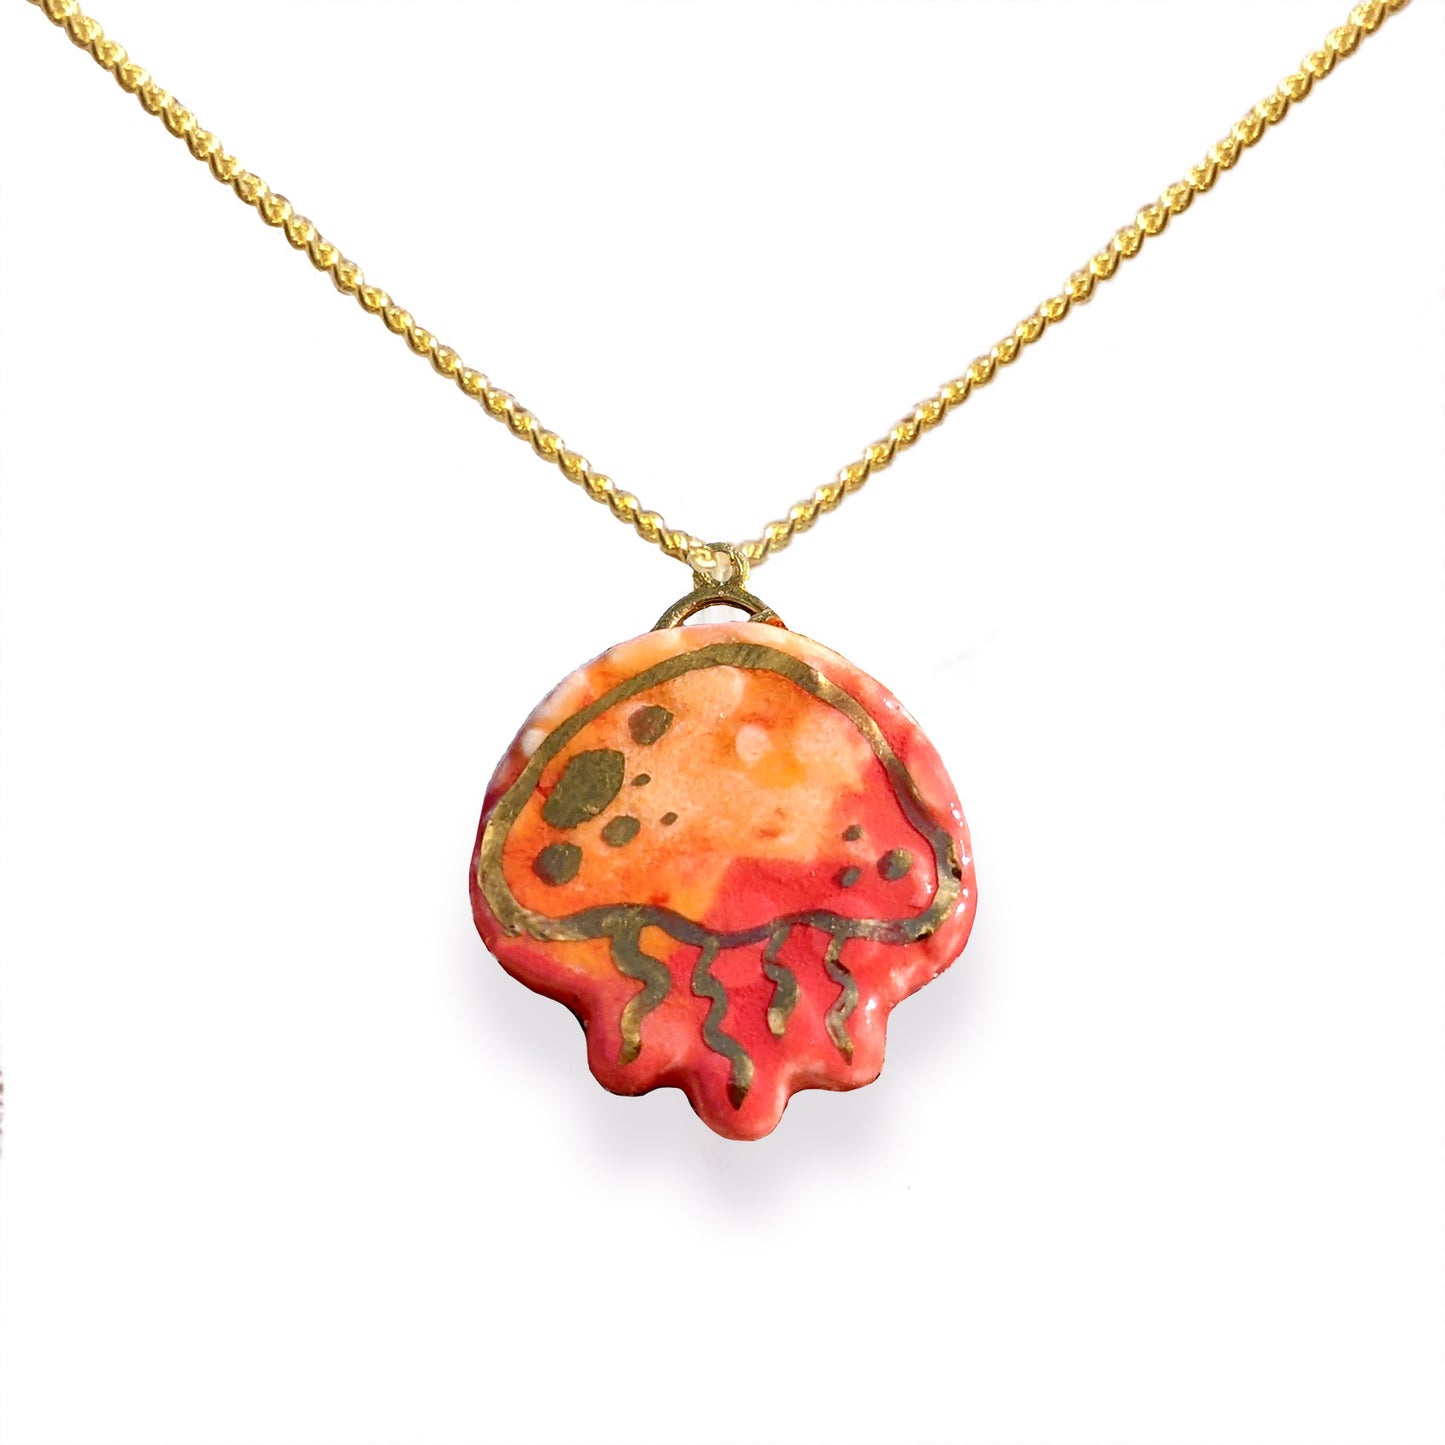 Jellyfish Bubble Necklace